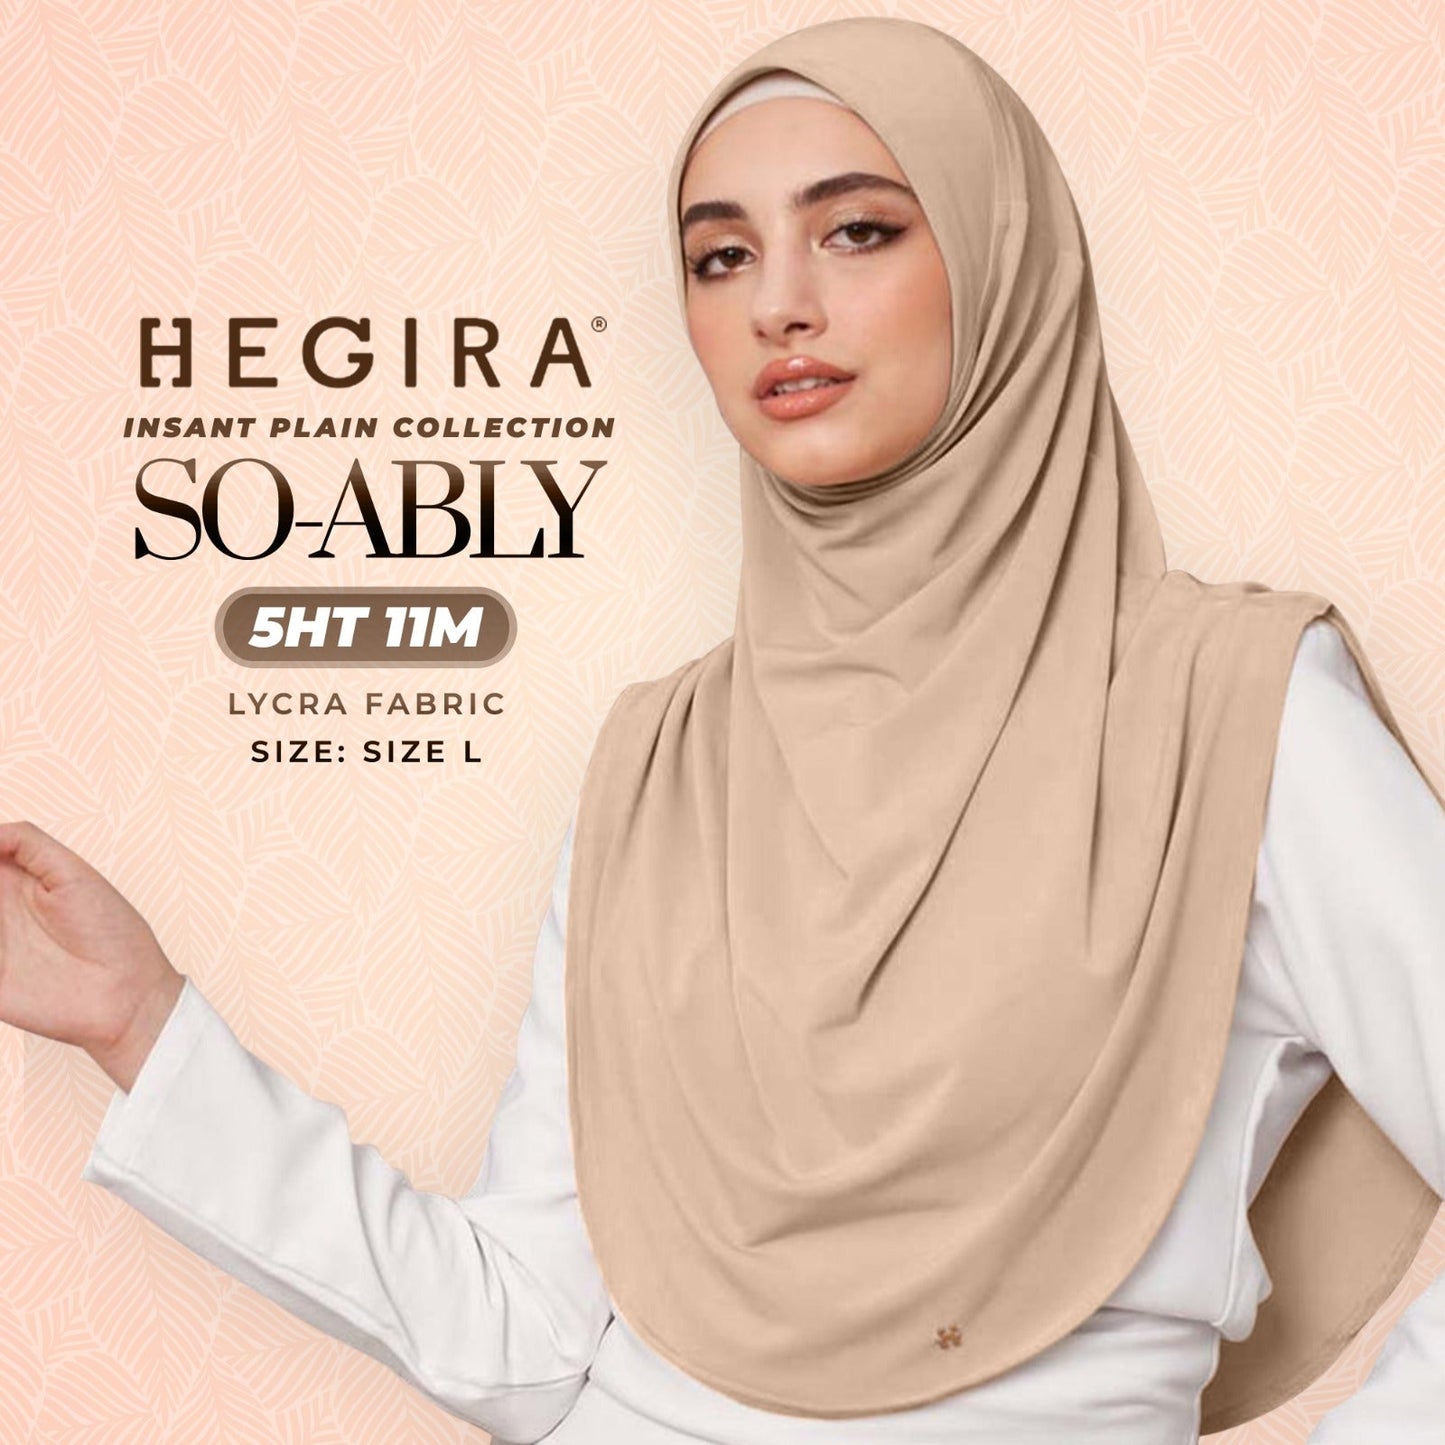 Hegira Inspired SO-ABLY Plain Instant Collection (5HT)